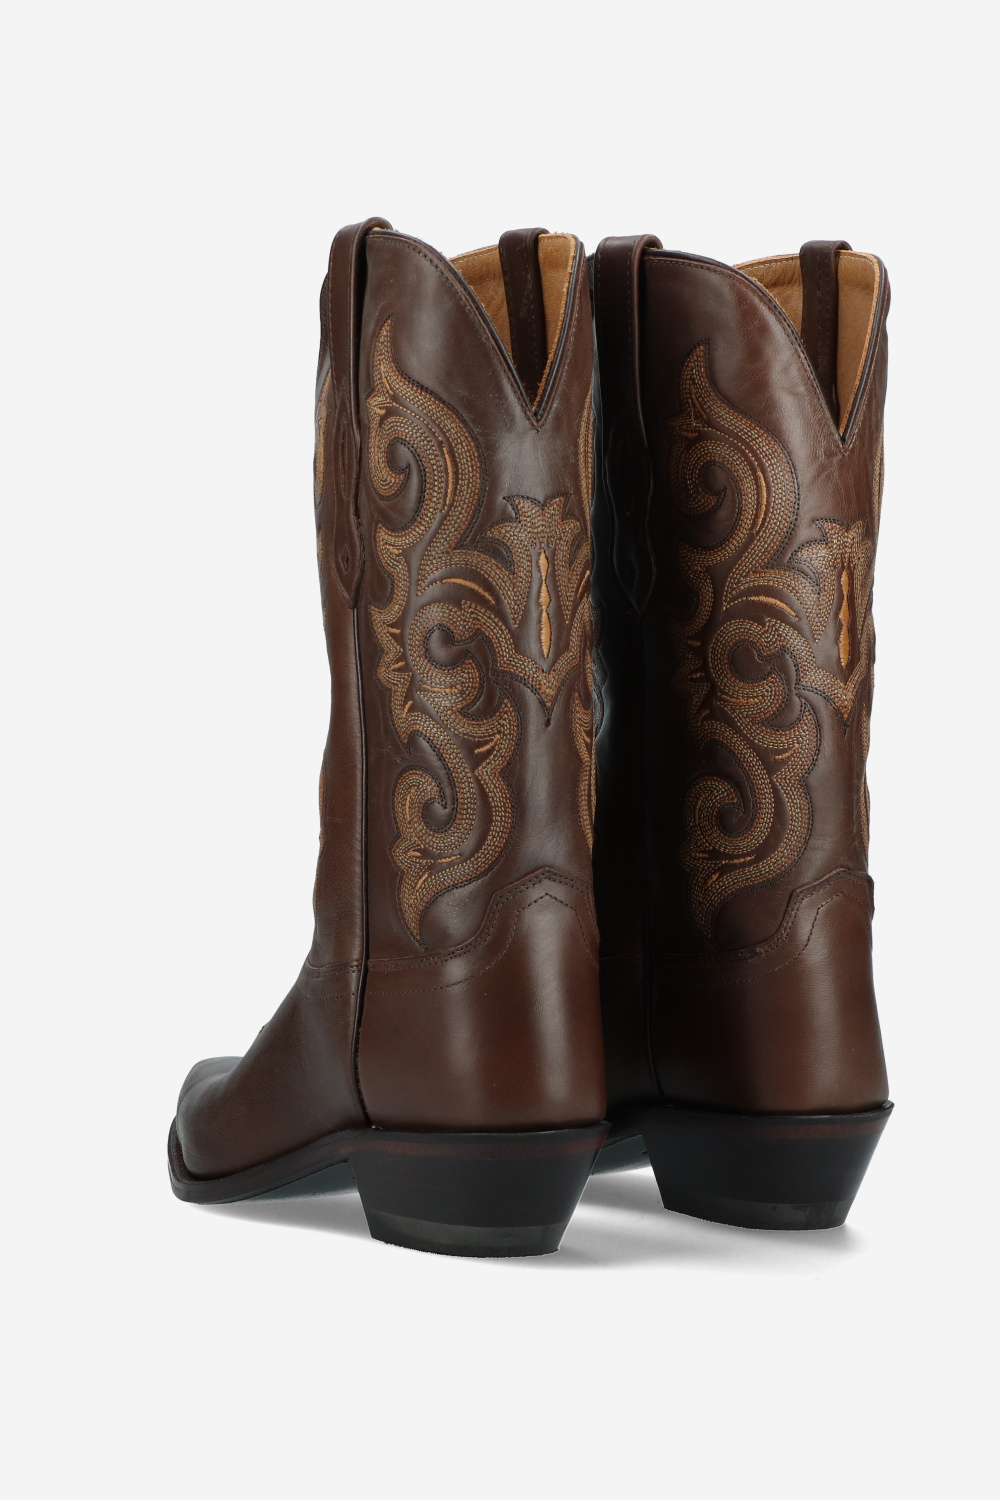 Bootstock Boots Brown